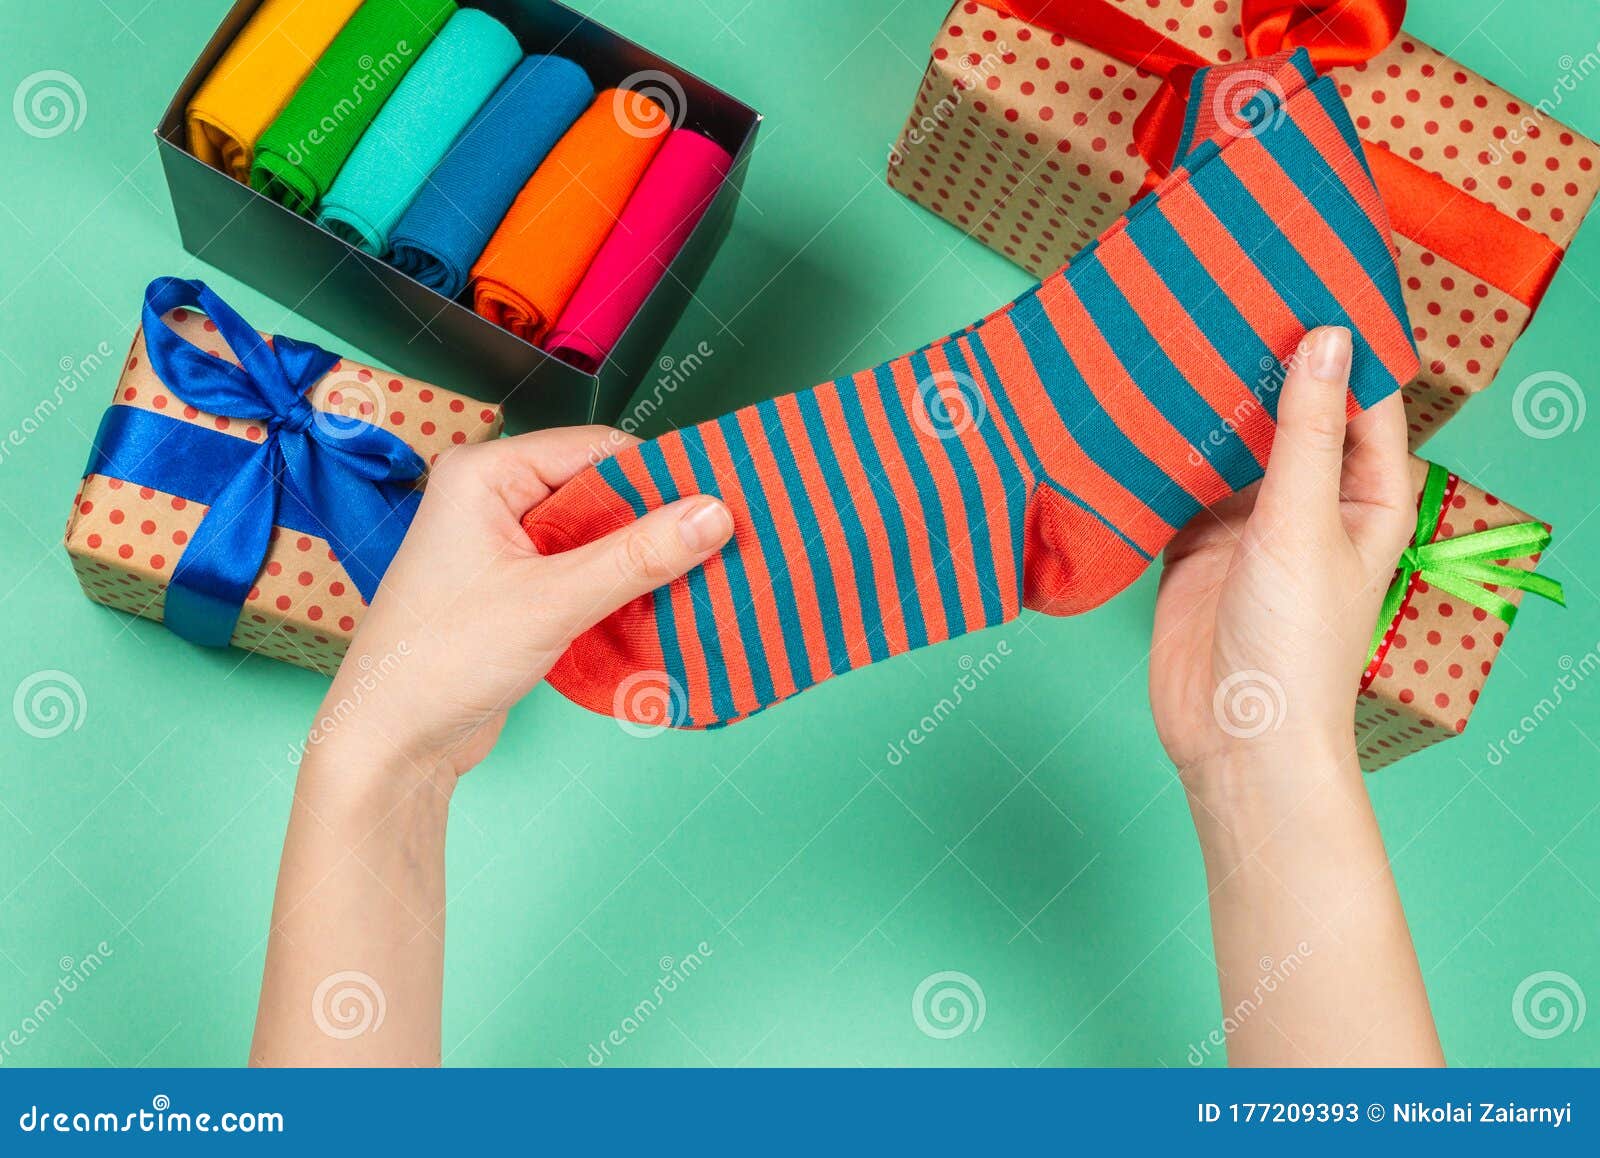 Colorful Collection of Cotton Socks As a Gift in Woman Hands Stock ...